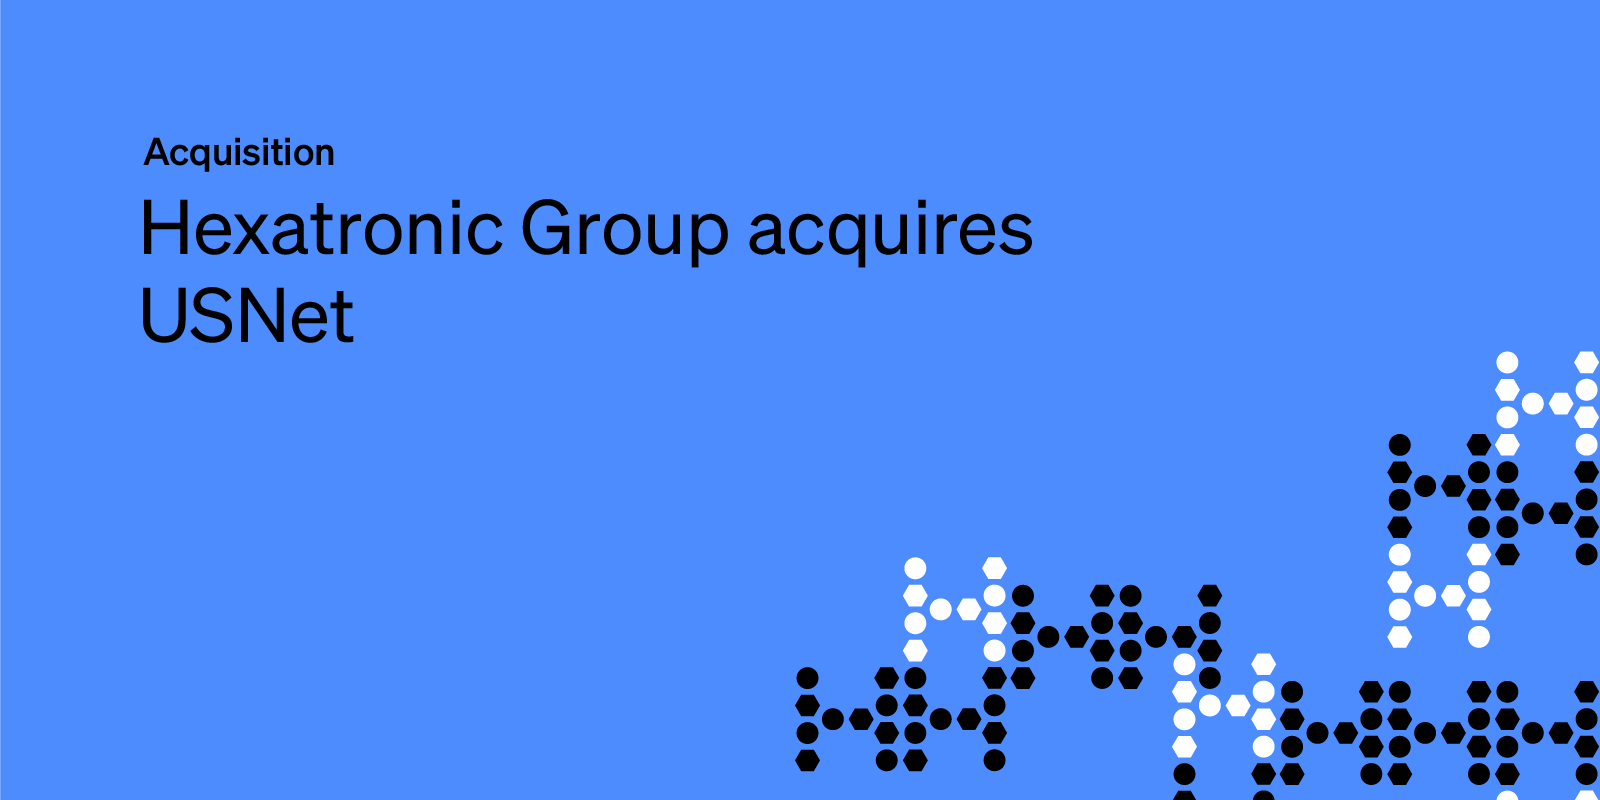 Hexatronic Group acquires USNet and strengthens its position in the US market within Data Centers